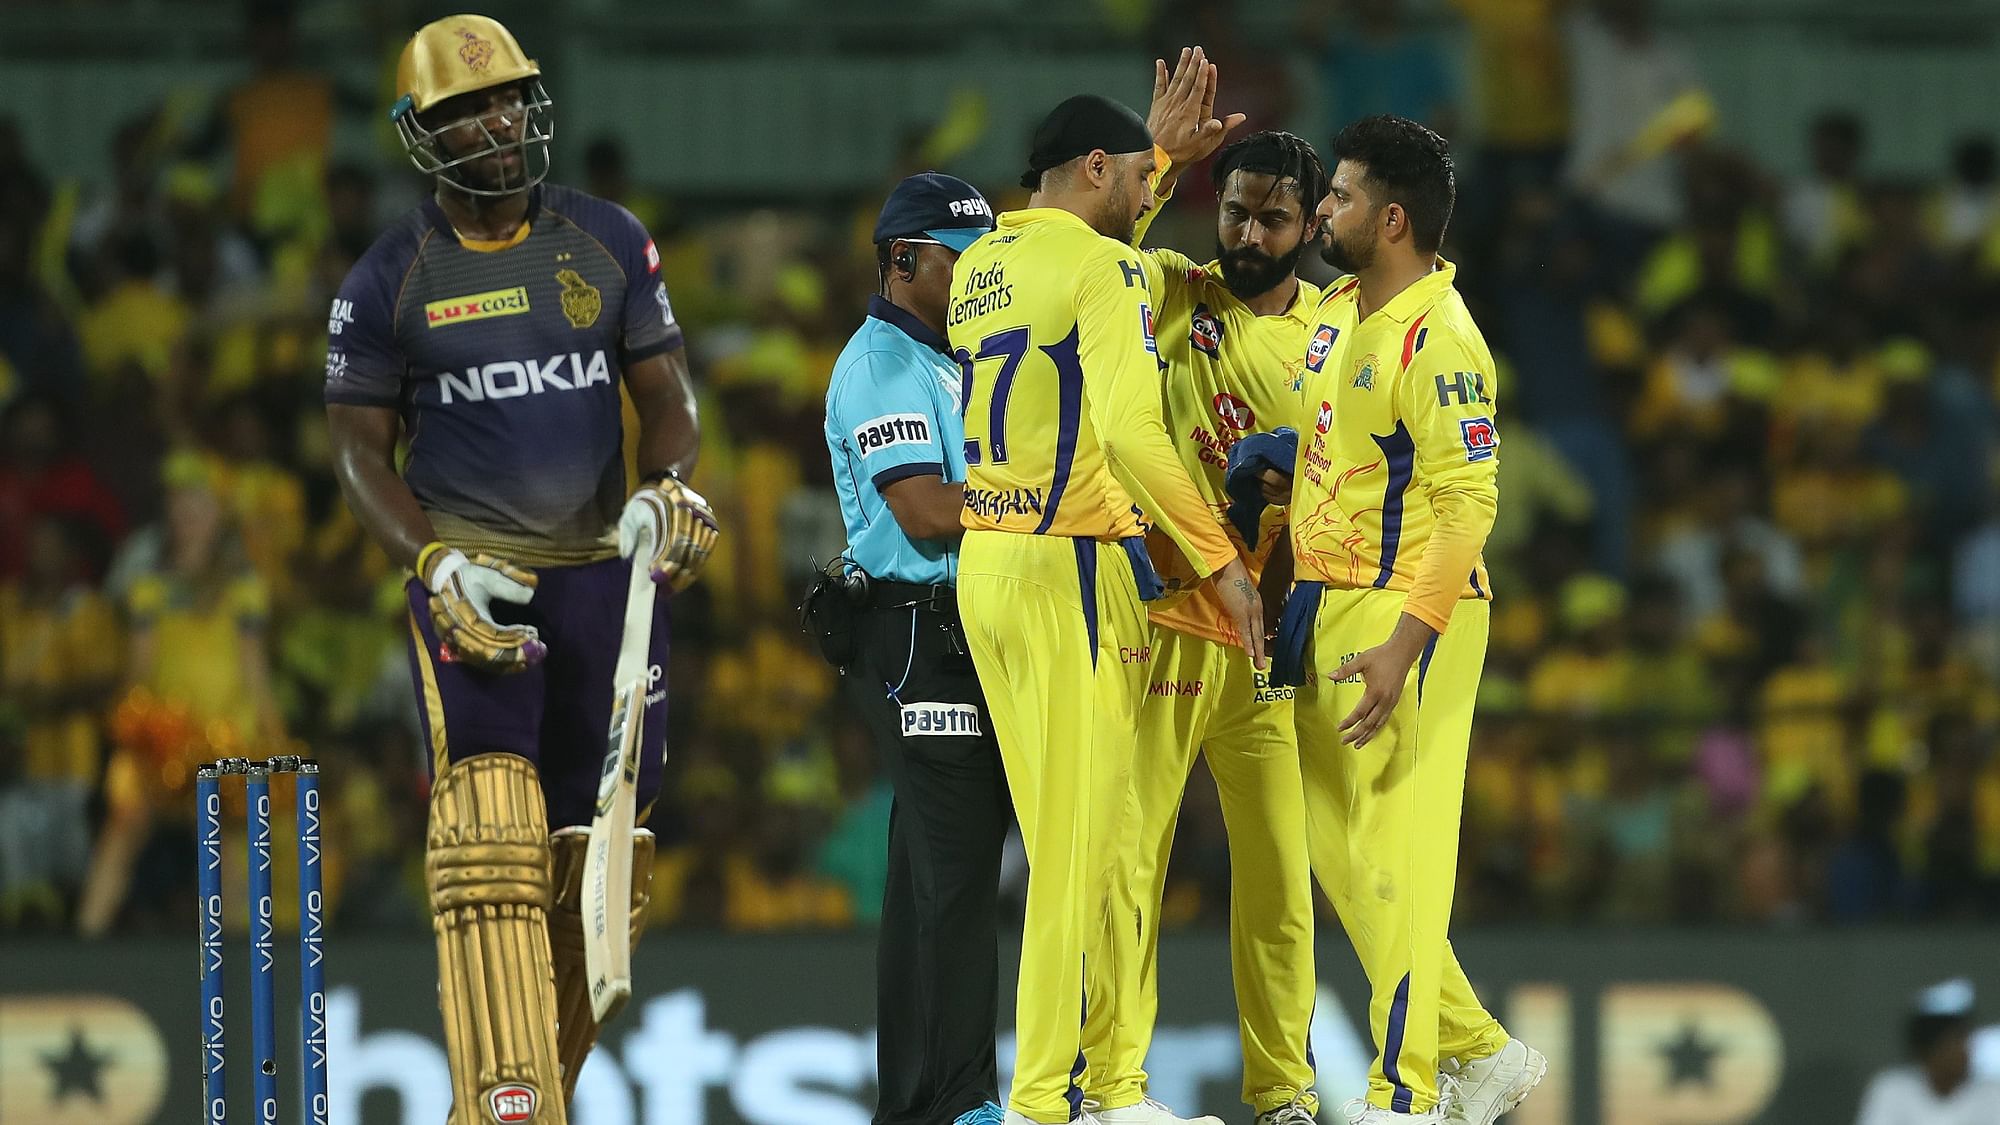  Chennai Super Kings  are back at the top of the table with five victories from six games while Kolkata Knight Riders suffered their second loss in six matches.